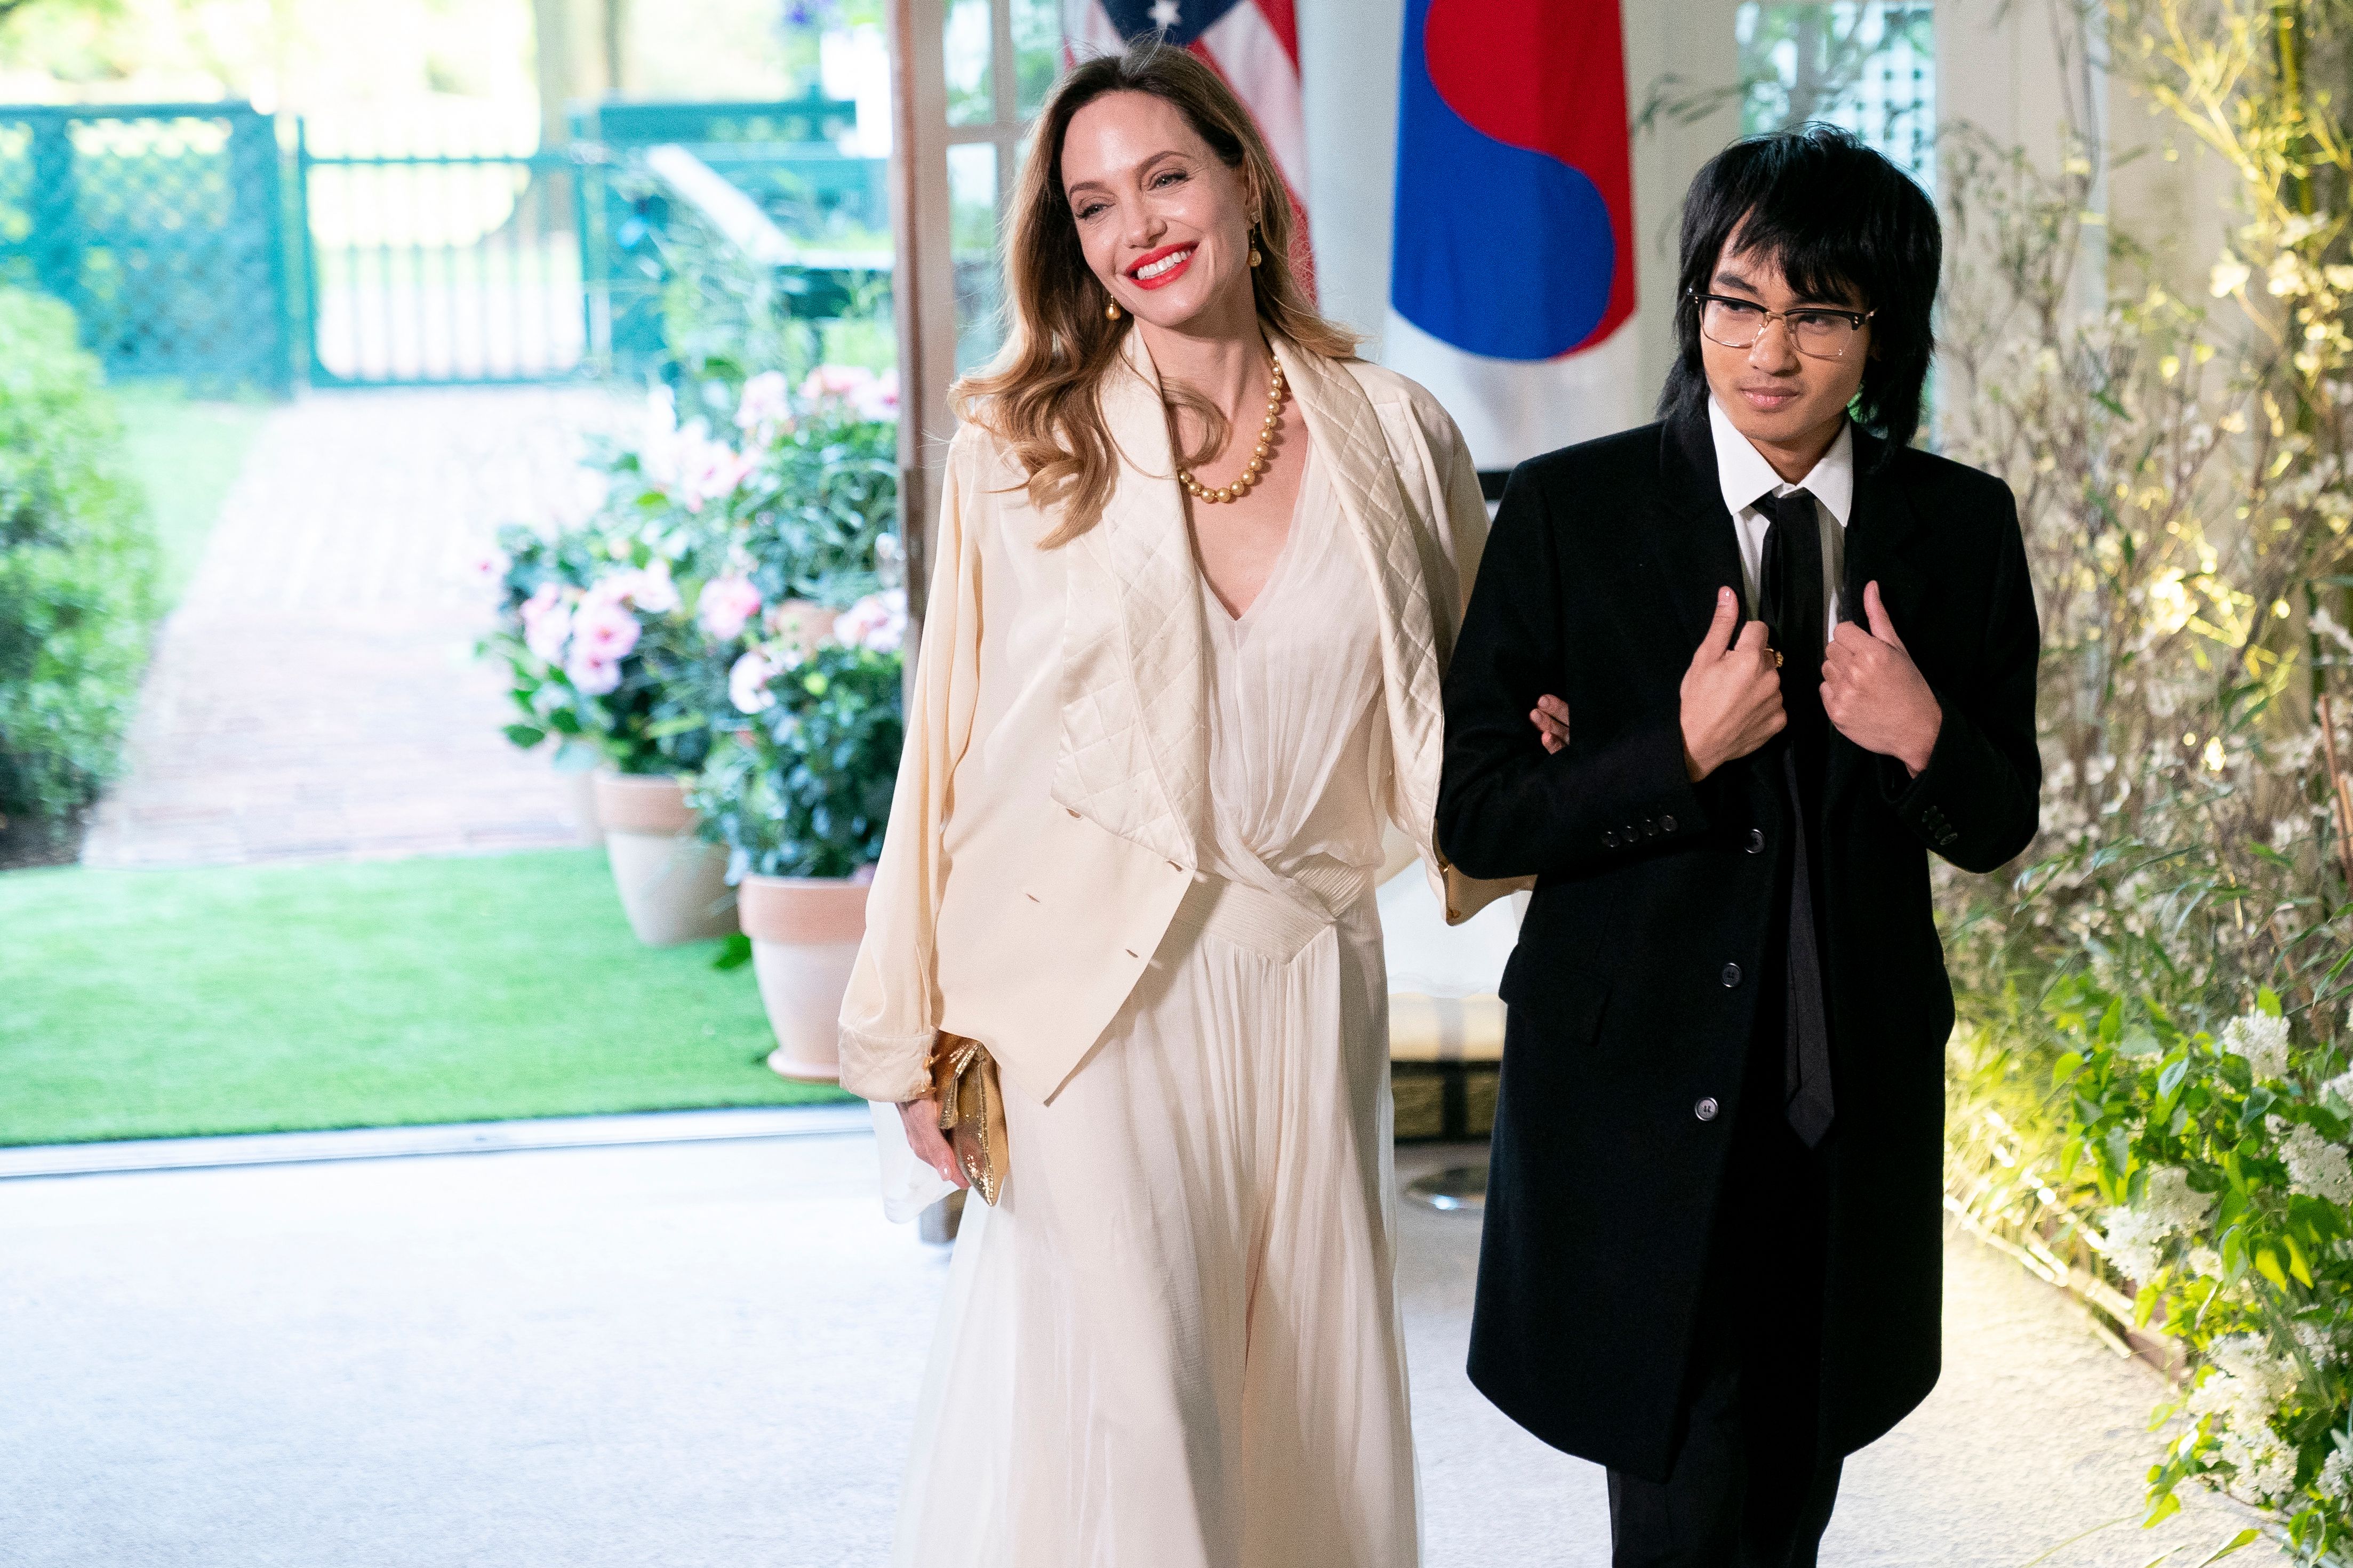 Angelina Jolie and her son, Maddox, at State Dinner in honor of South Korean President Yoon Suk Yeol, at the White House in Washington, DC in 2023 | Source: Getty Images